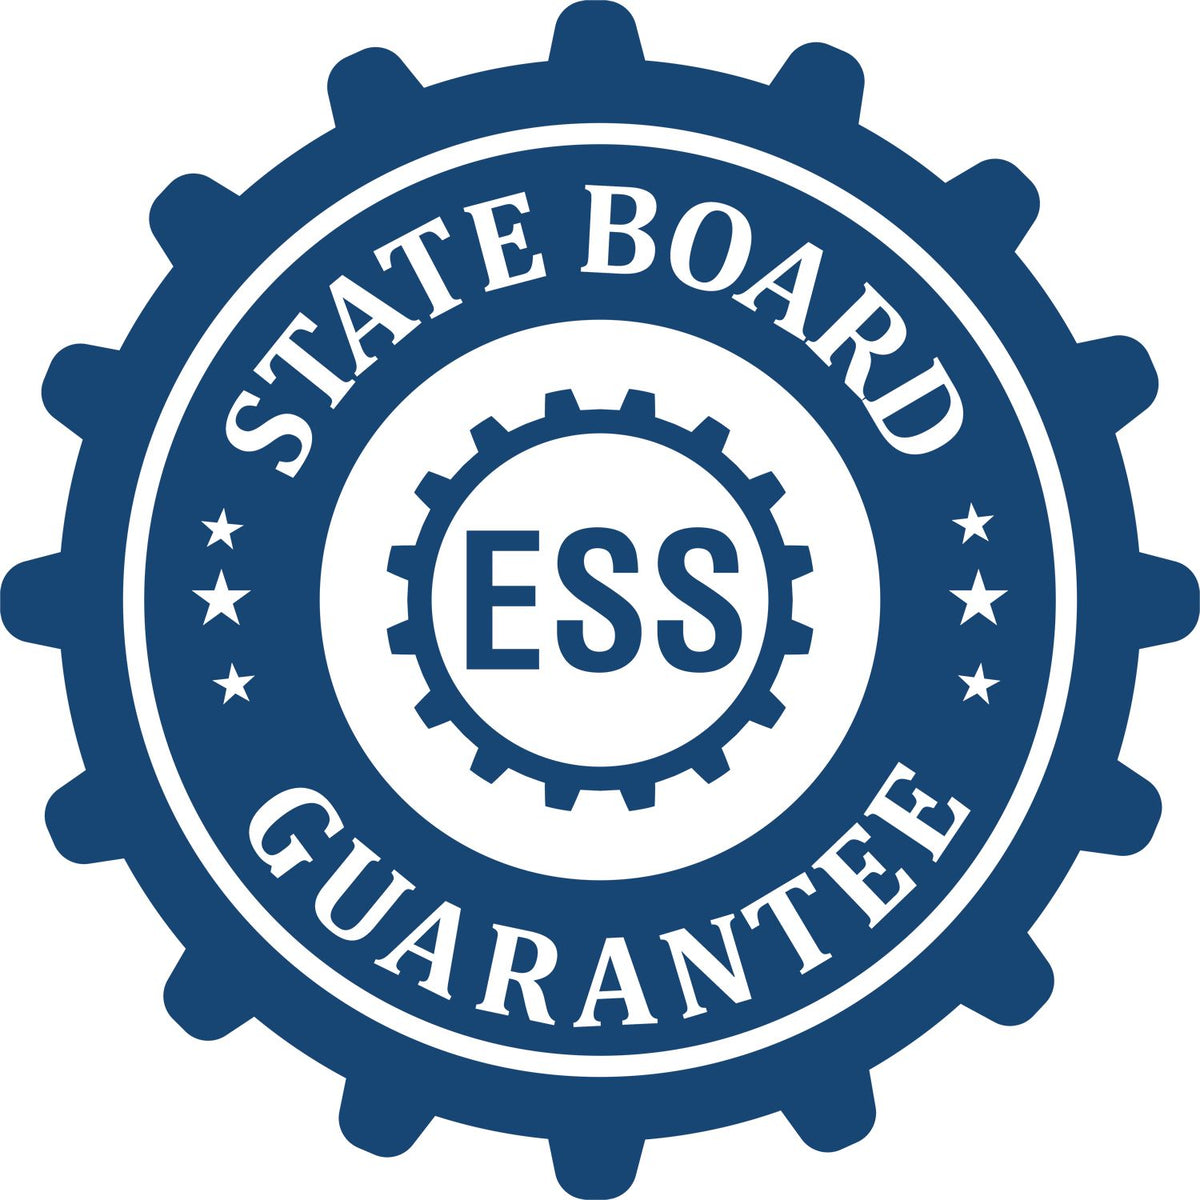 An emblem in a gear shape illustrating a state board guarantee for the Premium MaxLight Pre-Inked Montana Landscape Architectural Stamp product.